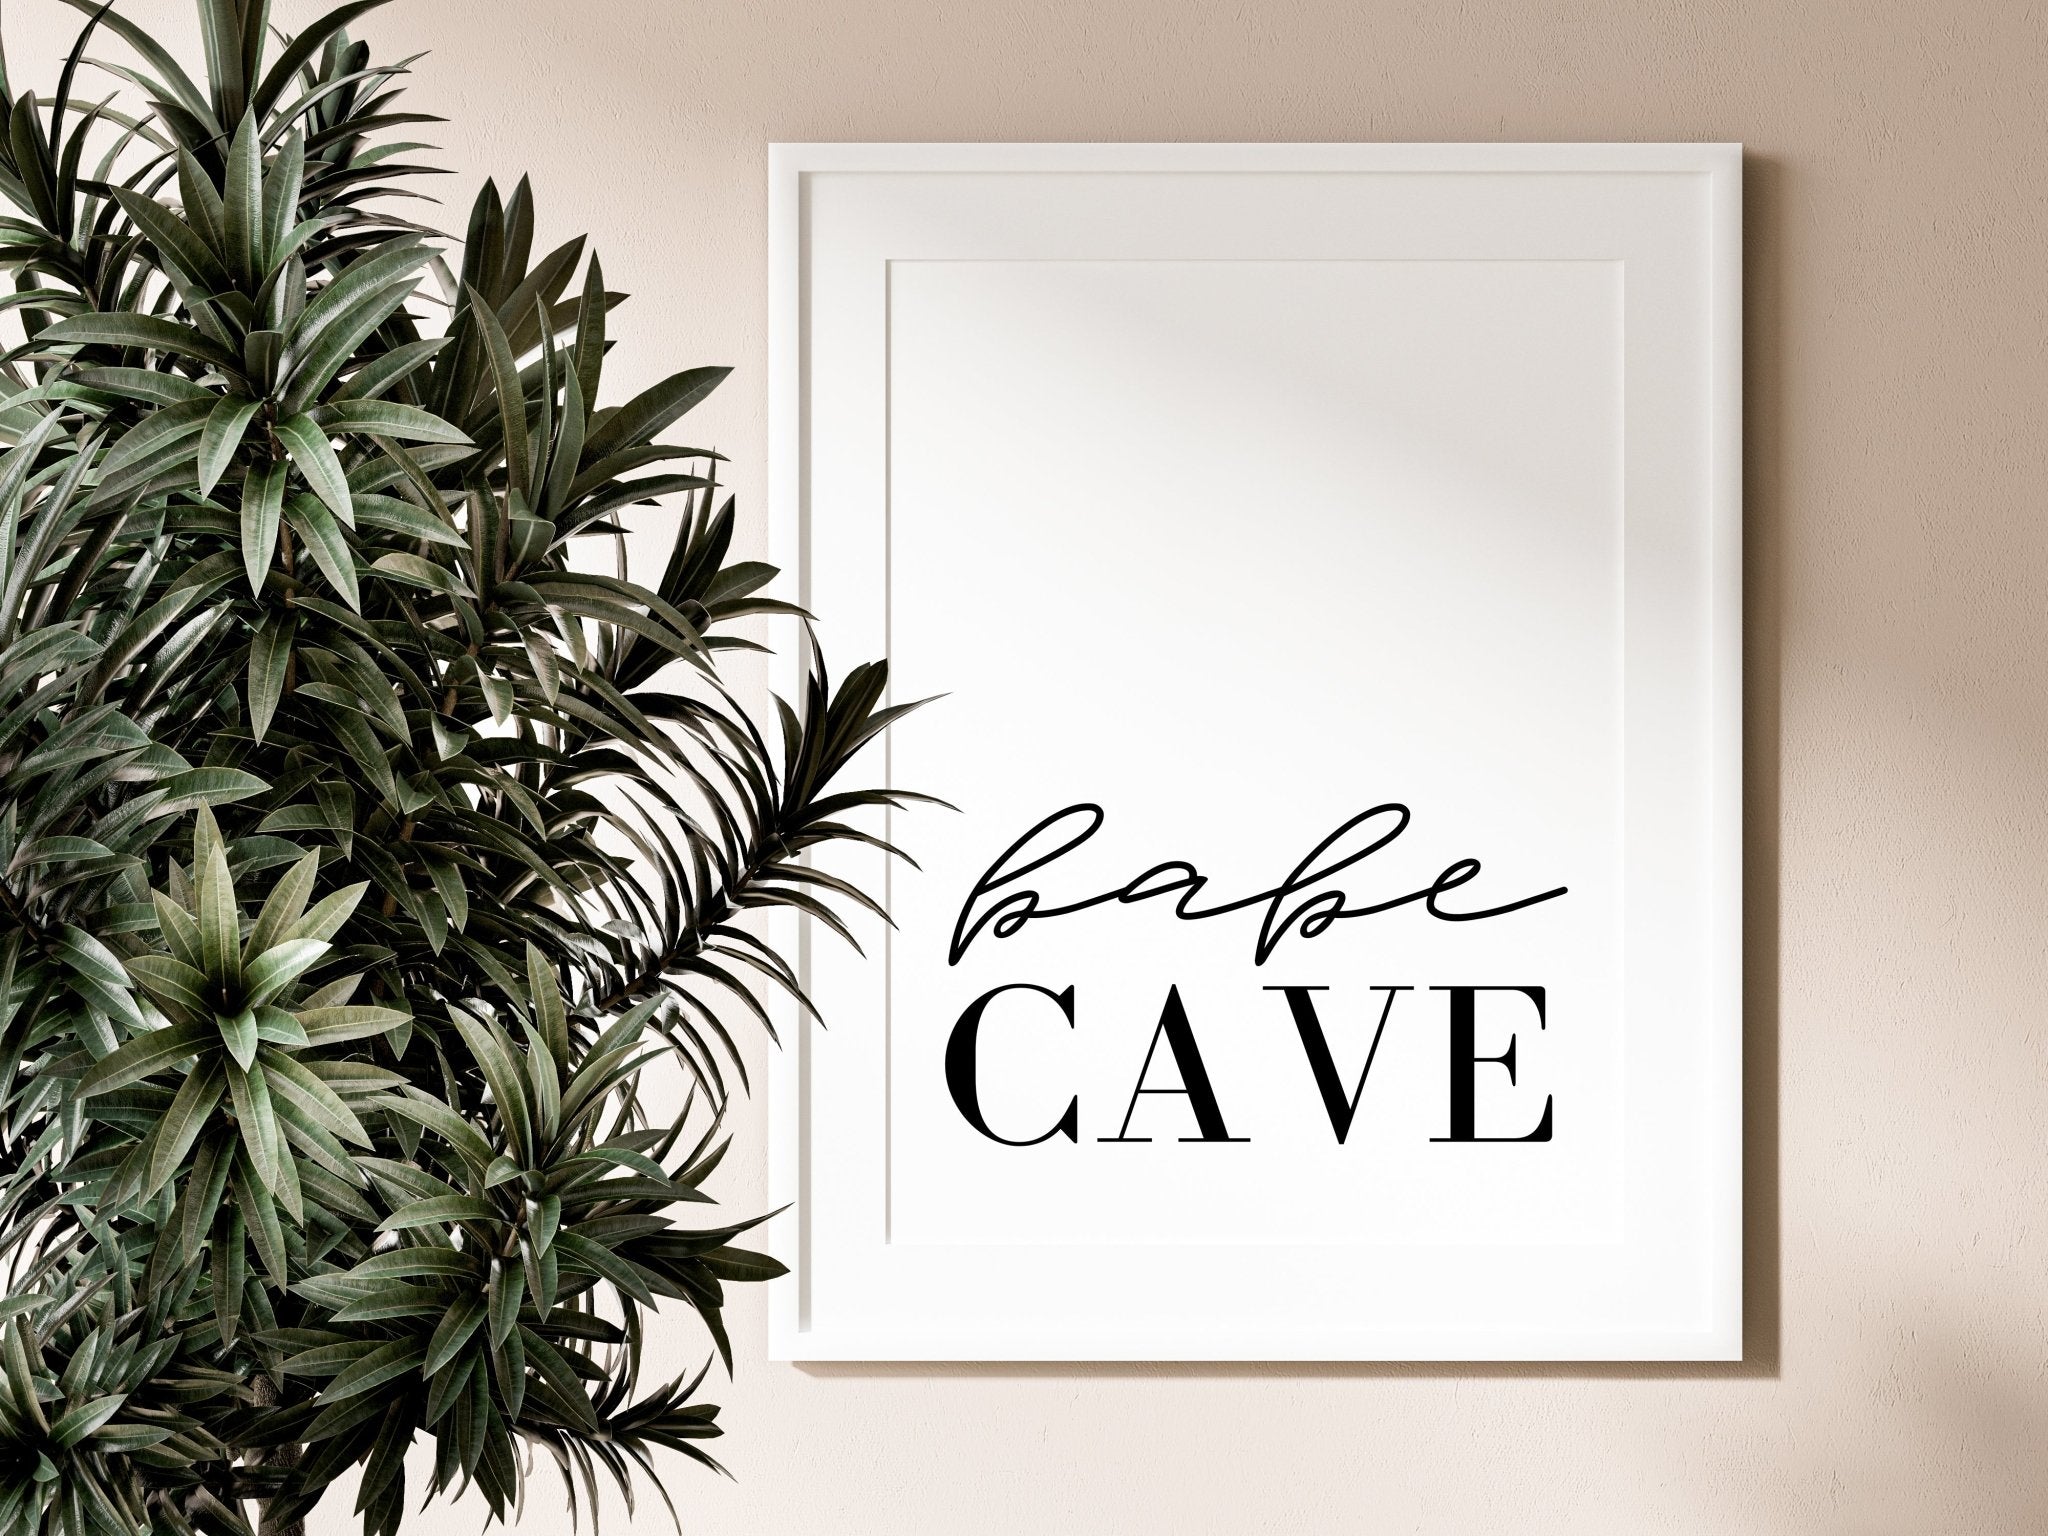 Babe Cave Wall Poster for Bedroom